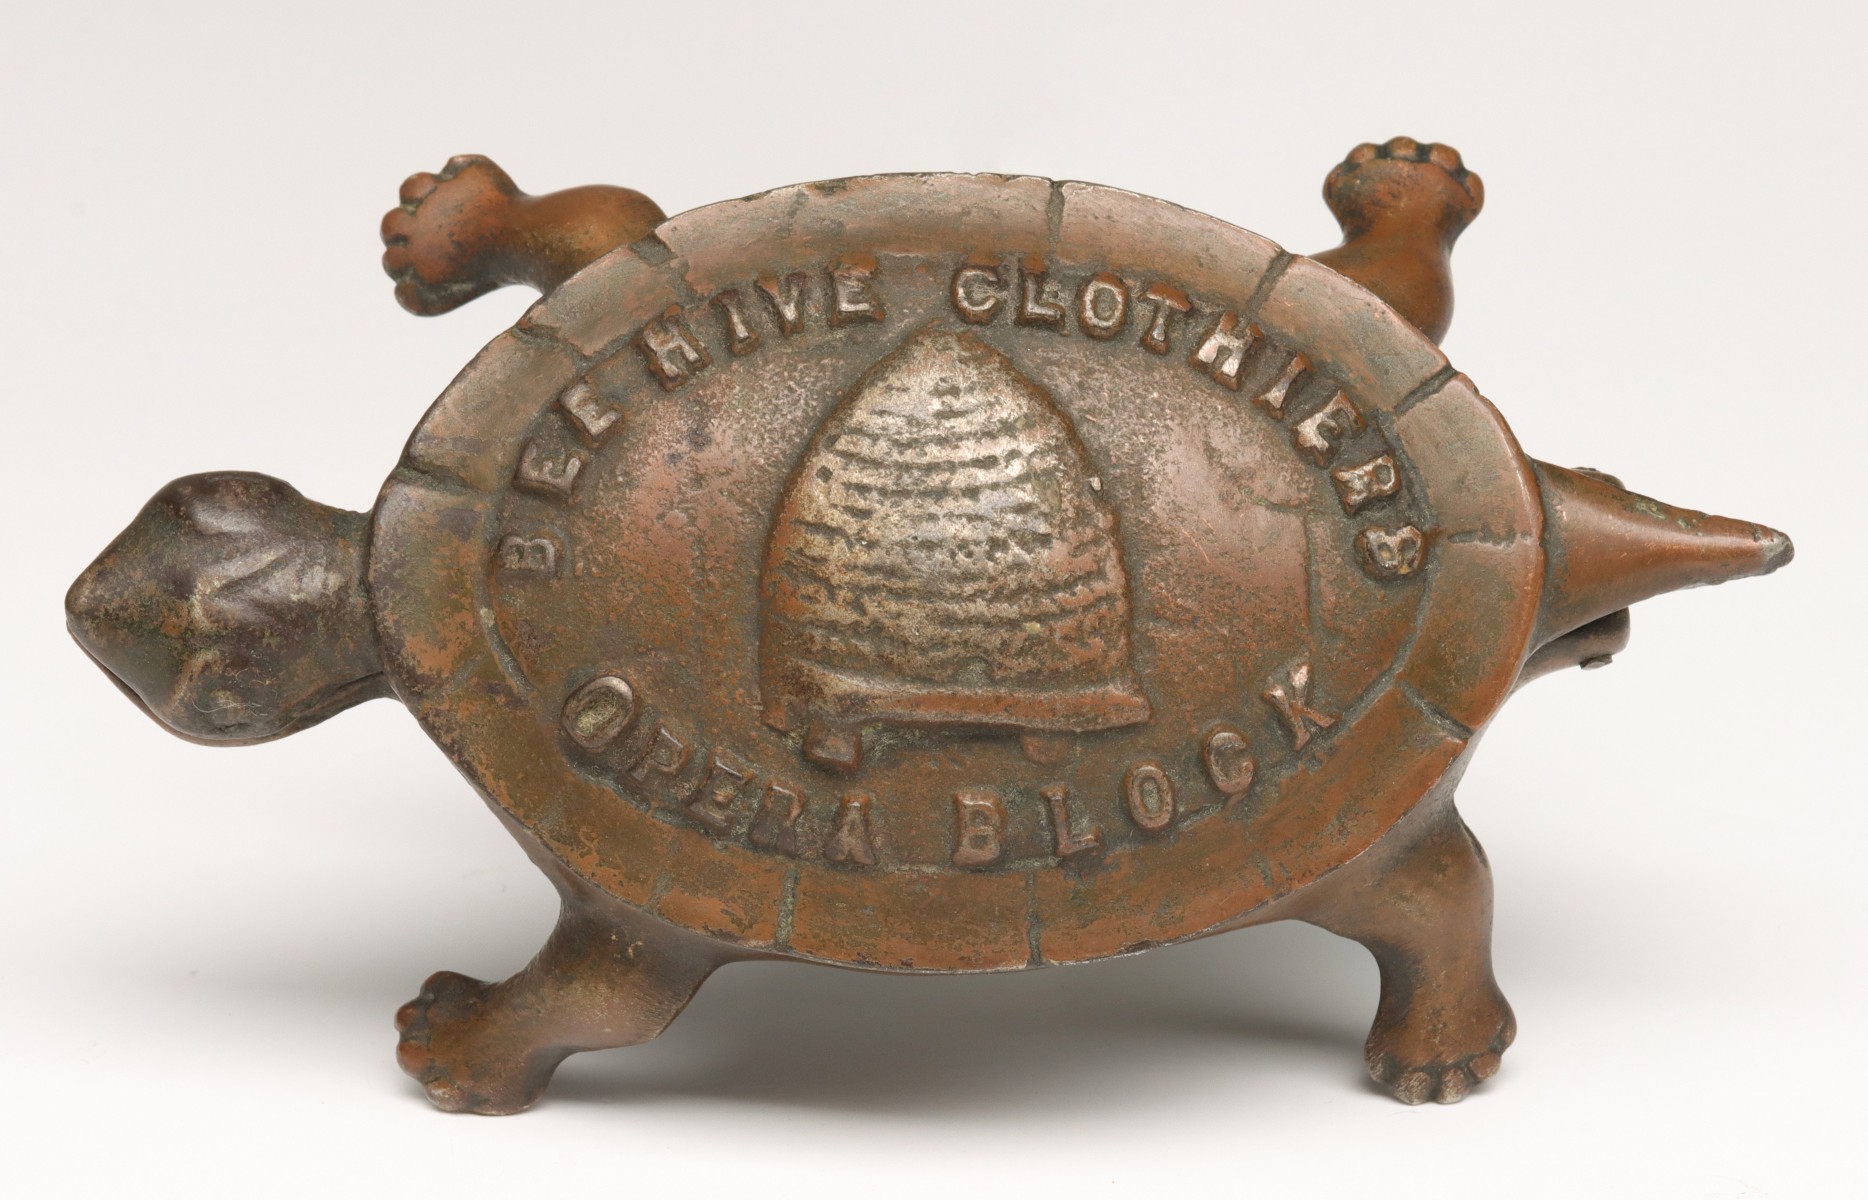 IRON TURTLE 'BEEHIVE CLOTHIERS' MATCH SAFE C. 1900